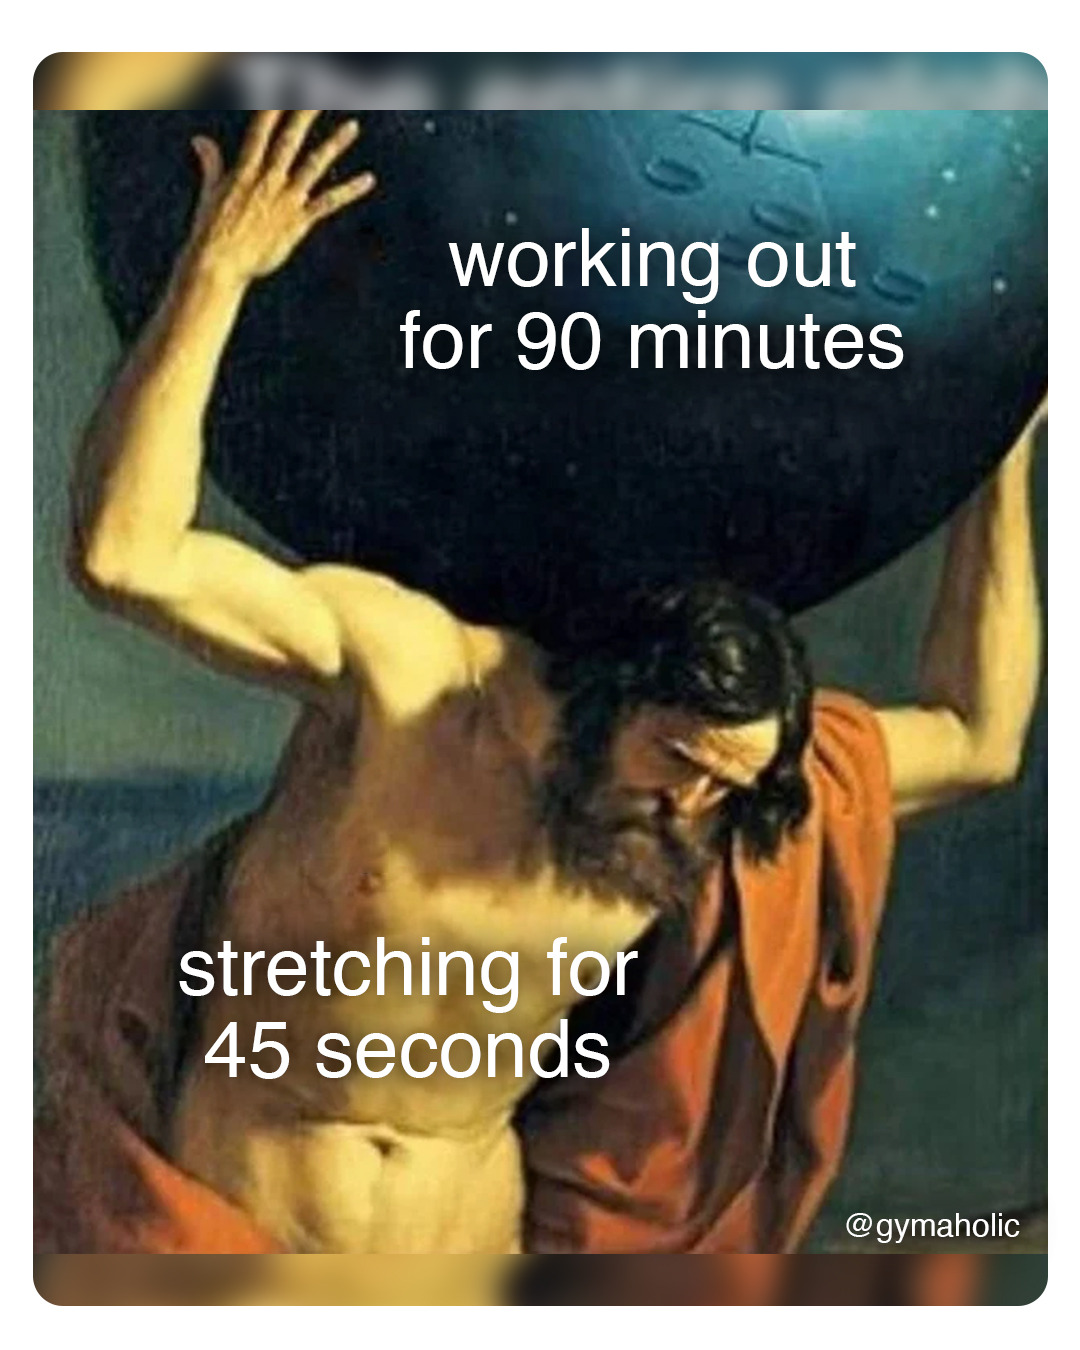 Working out for 90 minutes